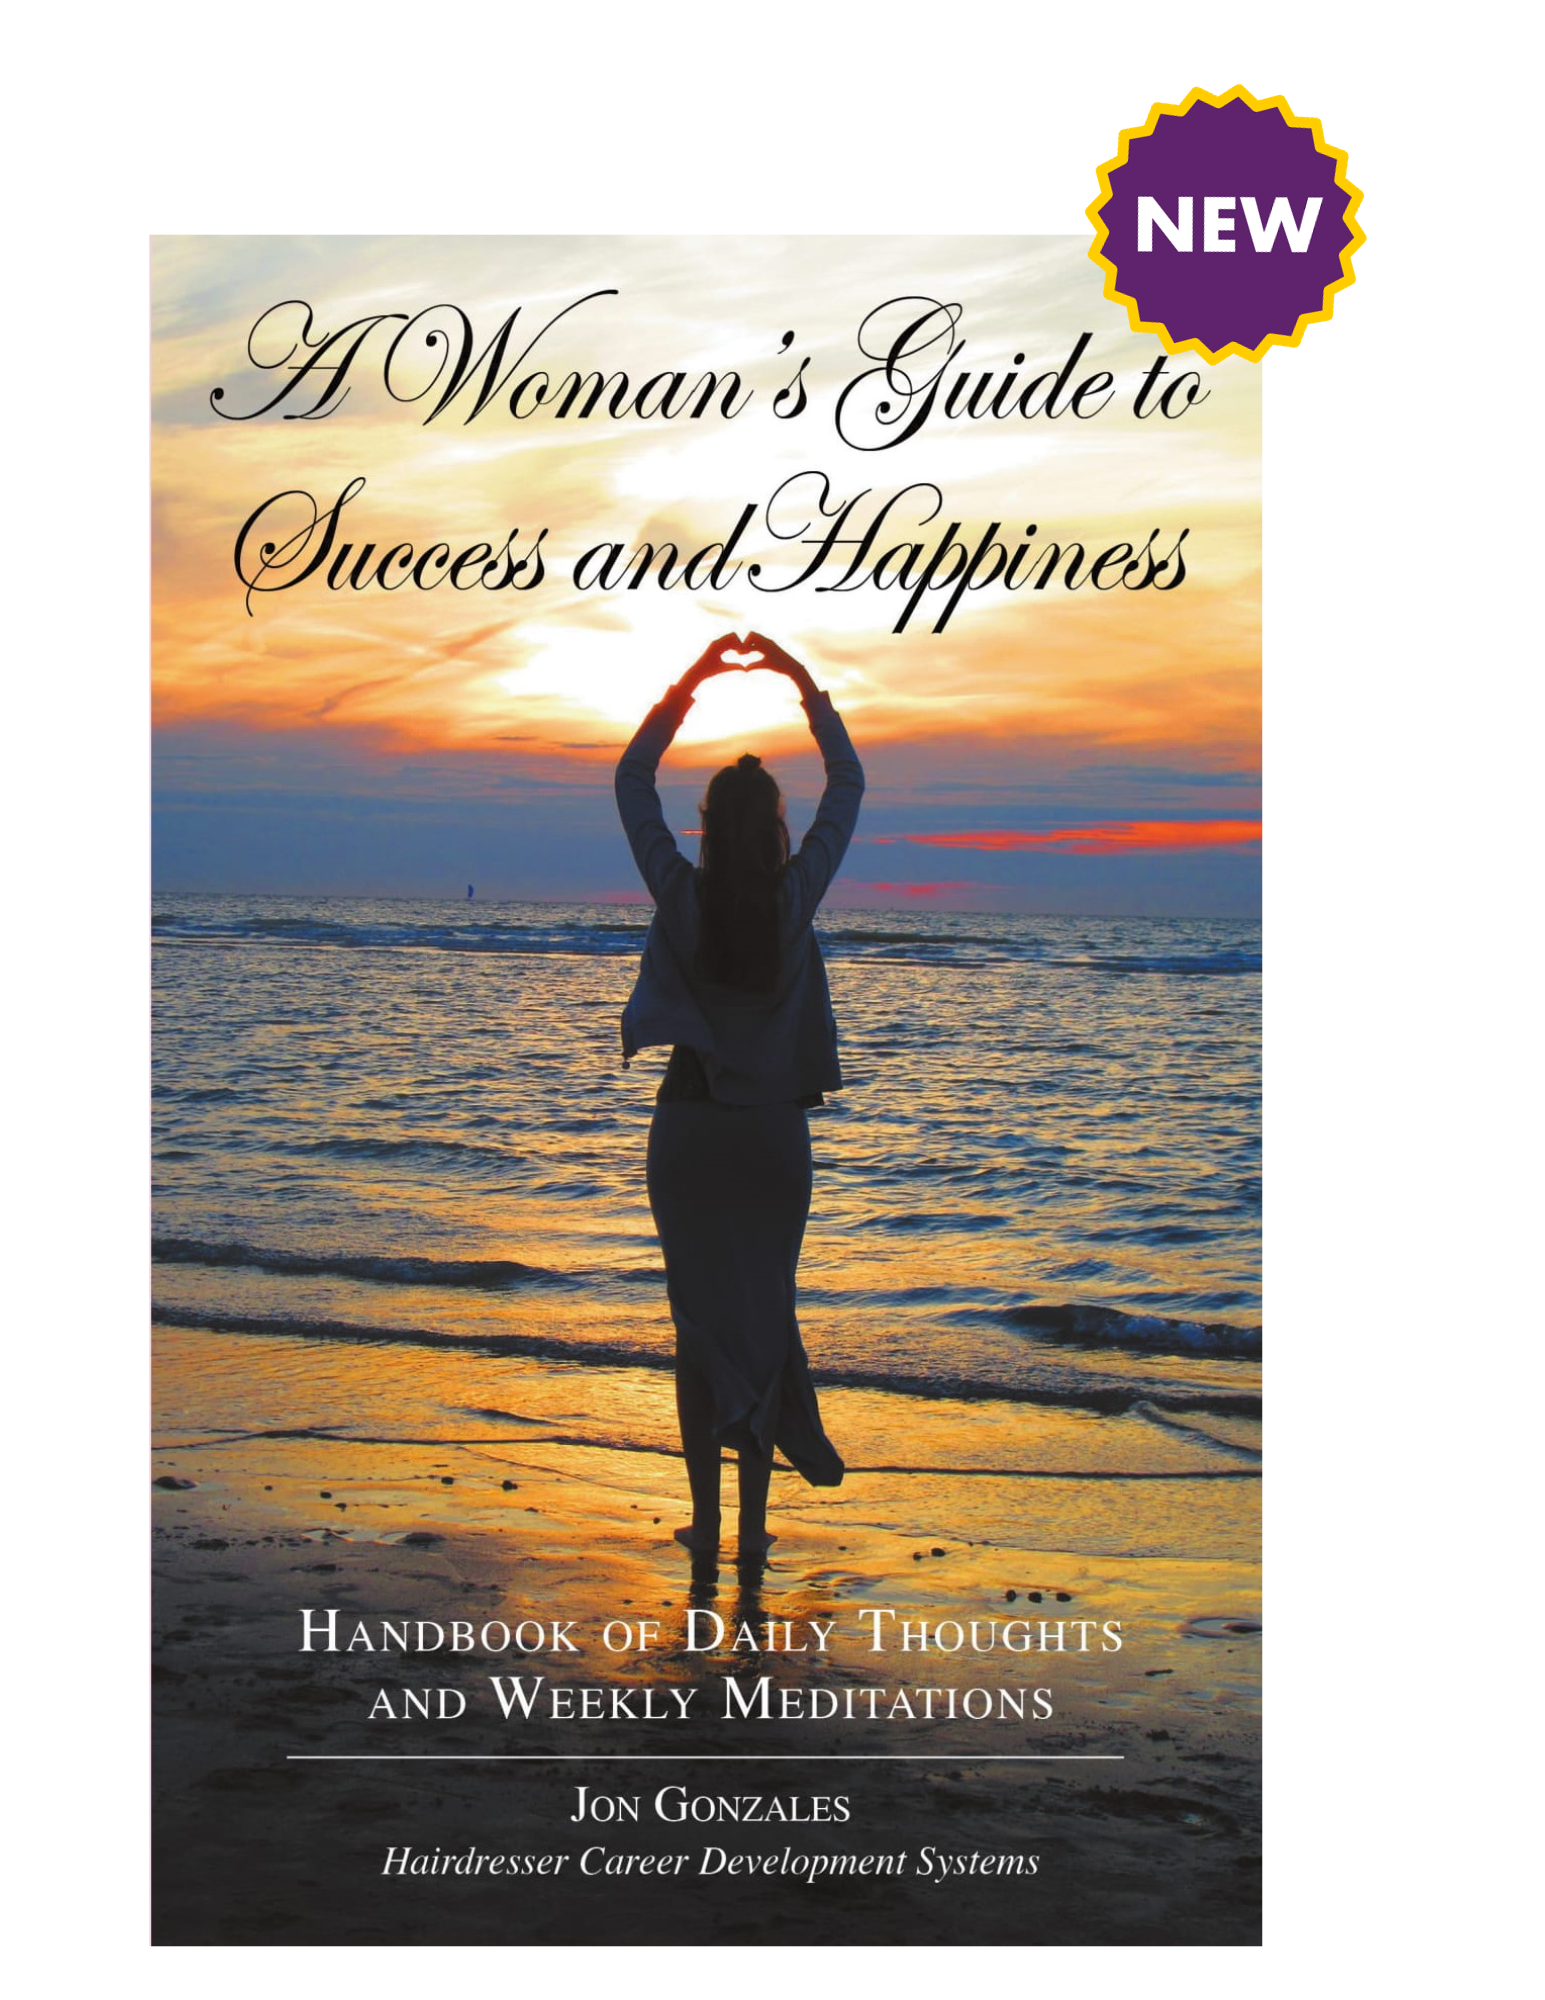 A Woman's Guide To Success And Happiness